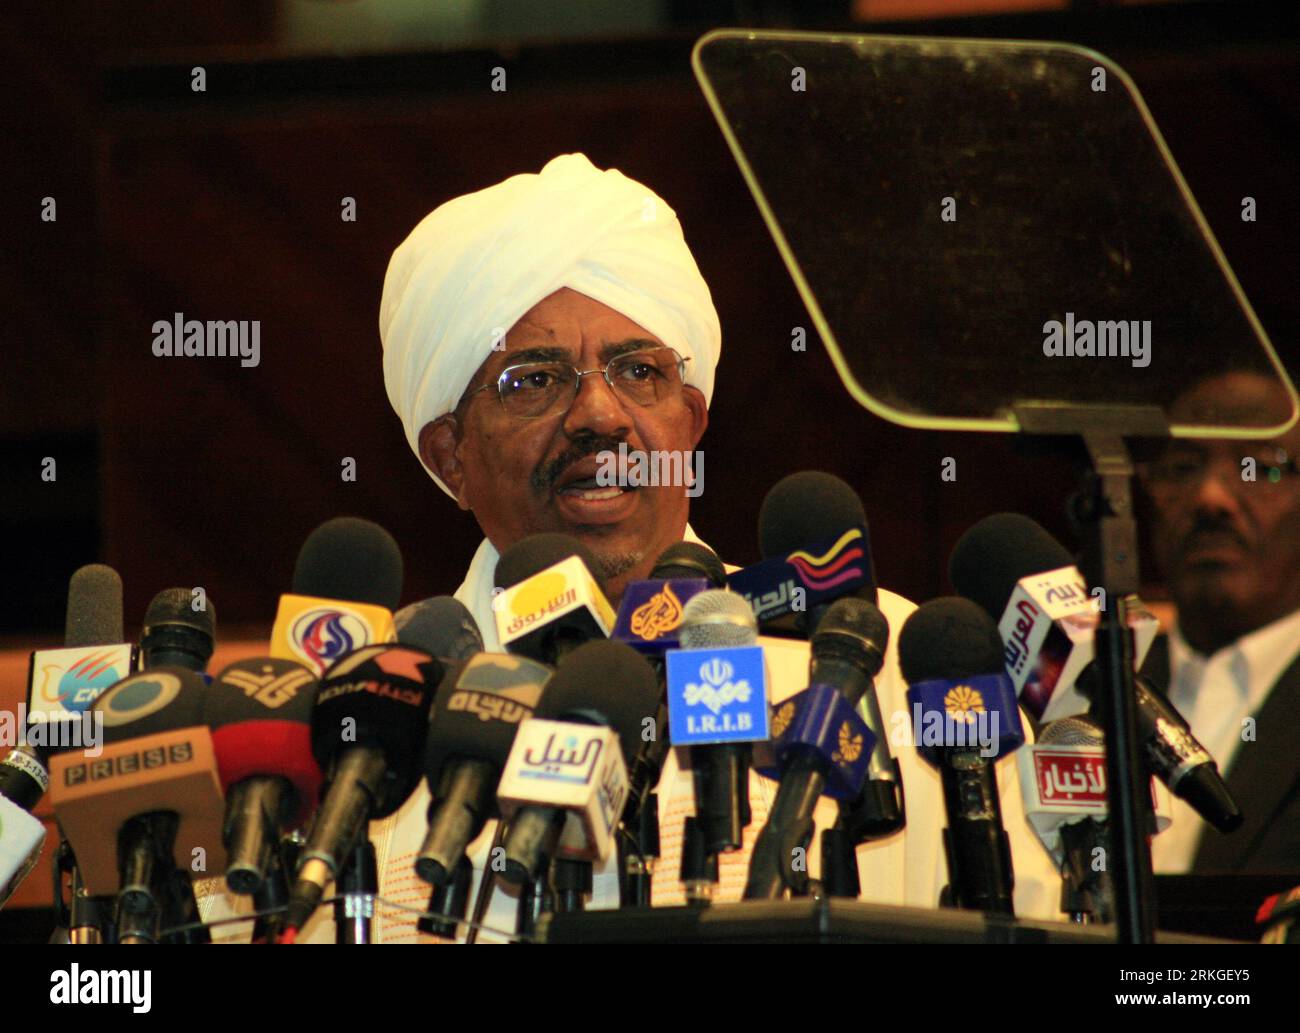 Bildnummer: 55587909  Datum: 12.07.2011  Copyright: imago/Xinhua (110712) -- KHARTOUM, July 12, 2011 (Xinhua) -- Sudanese President Omar Hassan al-Bashir delivers a speech at Sudan s parliament in Khartoum on July 12, 2011. Sudanese President Omar Hassan al-Bashir said on Tuesday that the country is planning to launch its own currency in the wake of South Sudan s announcement to replace the Sudanese pound. (Xinhua/Mohammed Babiker) (srb) SUDAN-KHARTOUM-POLICY-NEW CURRENCY PUBLICATIONxNOTxINxCHN People Politik x0x xst premiumd 2011 quer     Bildnummer 55587909 Date 12 07 2011 Copyright Imago XI Stock Photo